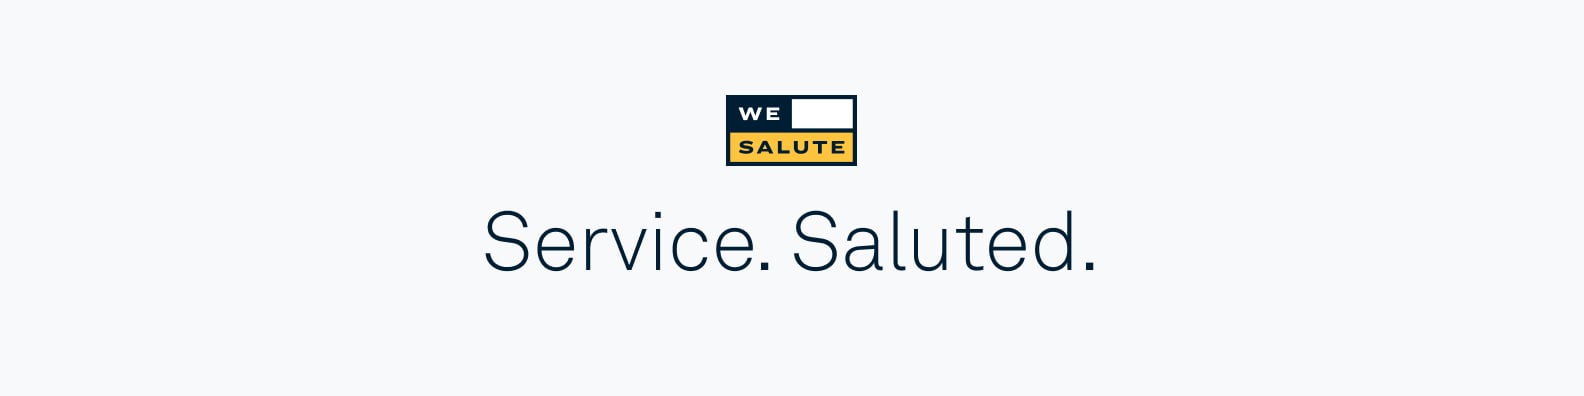 wesalute-cover-image